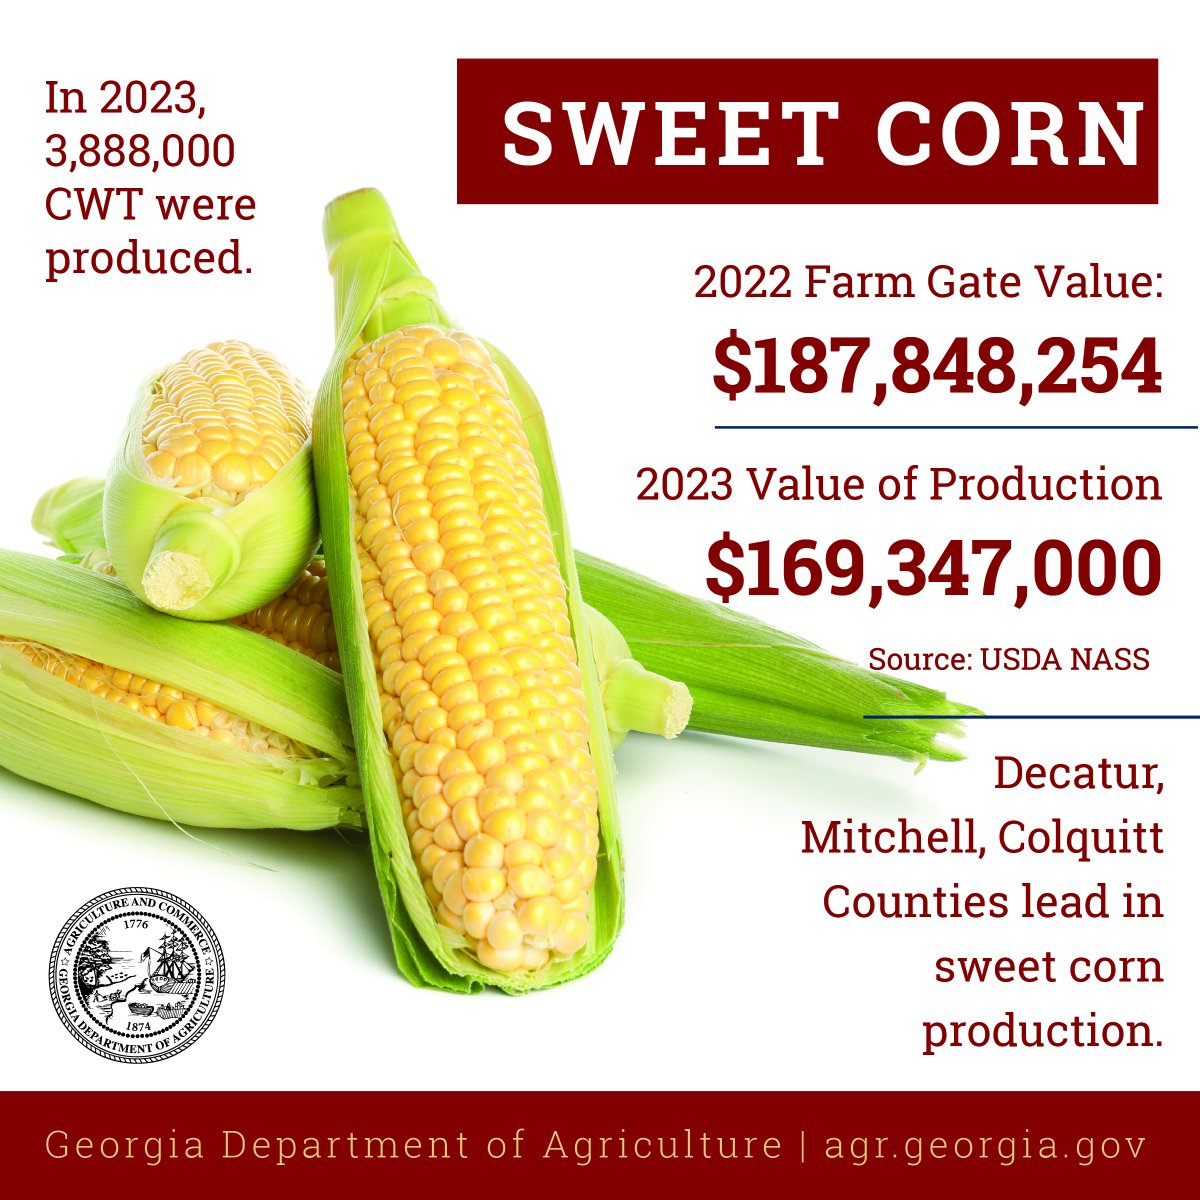 Georgia's sweet corn is the cream of the crop! 🌽 With a Farm Gate Value of $187,848,254 in 2022, it's no wonder it ranks #1 among veggies. In 2023, 3,888,000 CWT were harvested, with a value of $169,347,000.